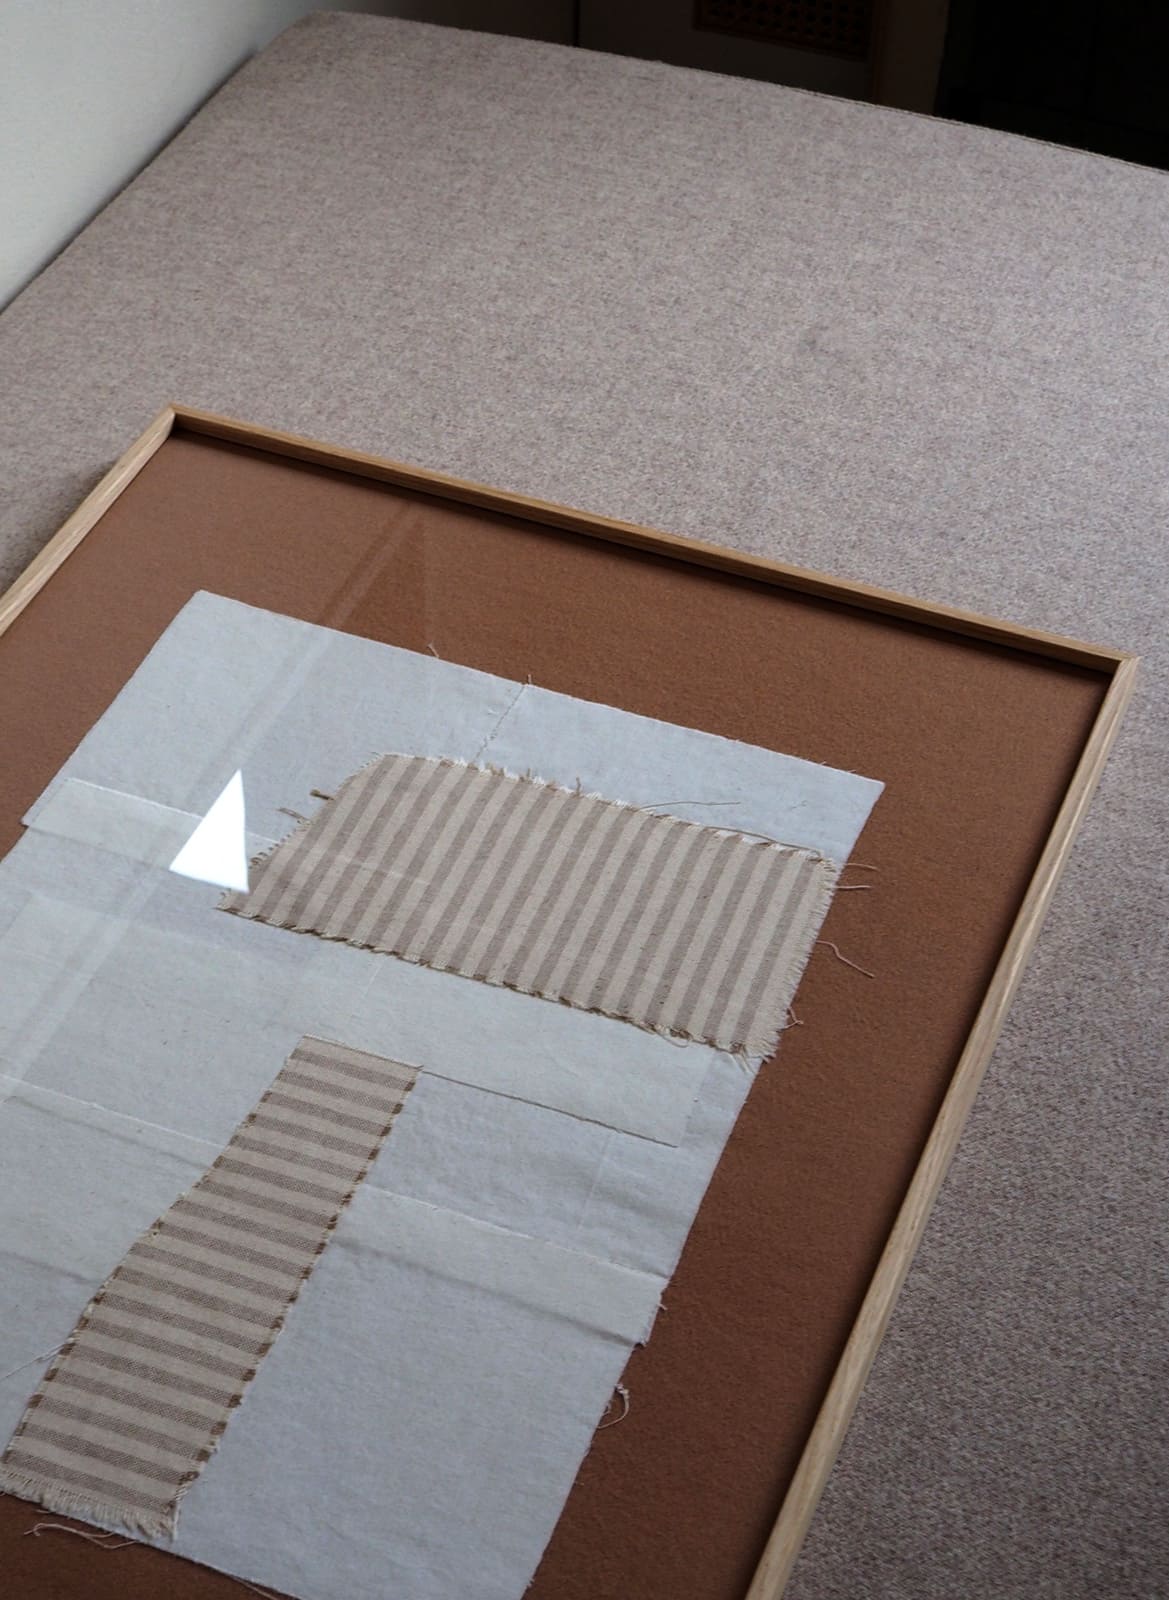  Framed fabric collage in brown and white, limited edition made by Atelier Cph